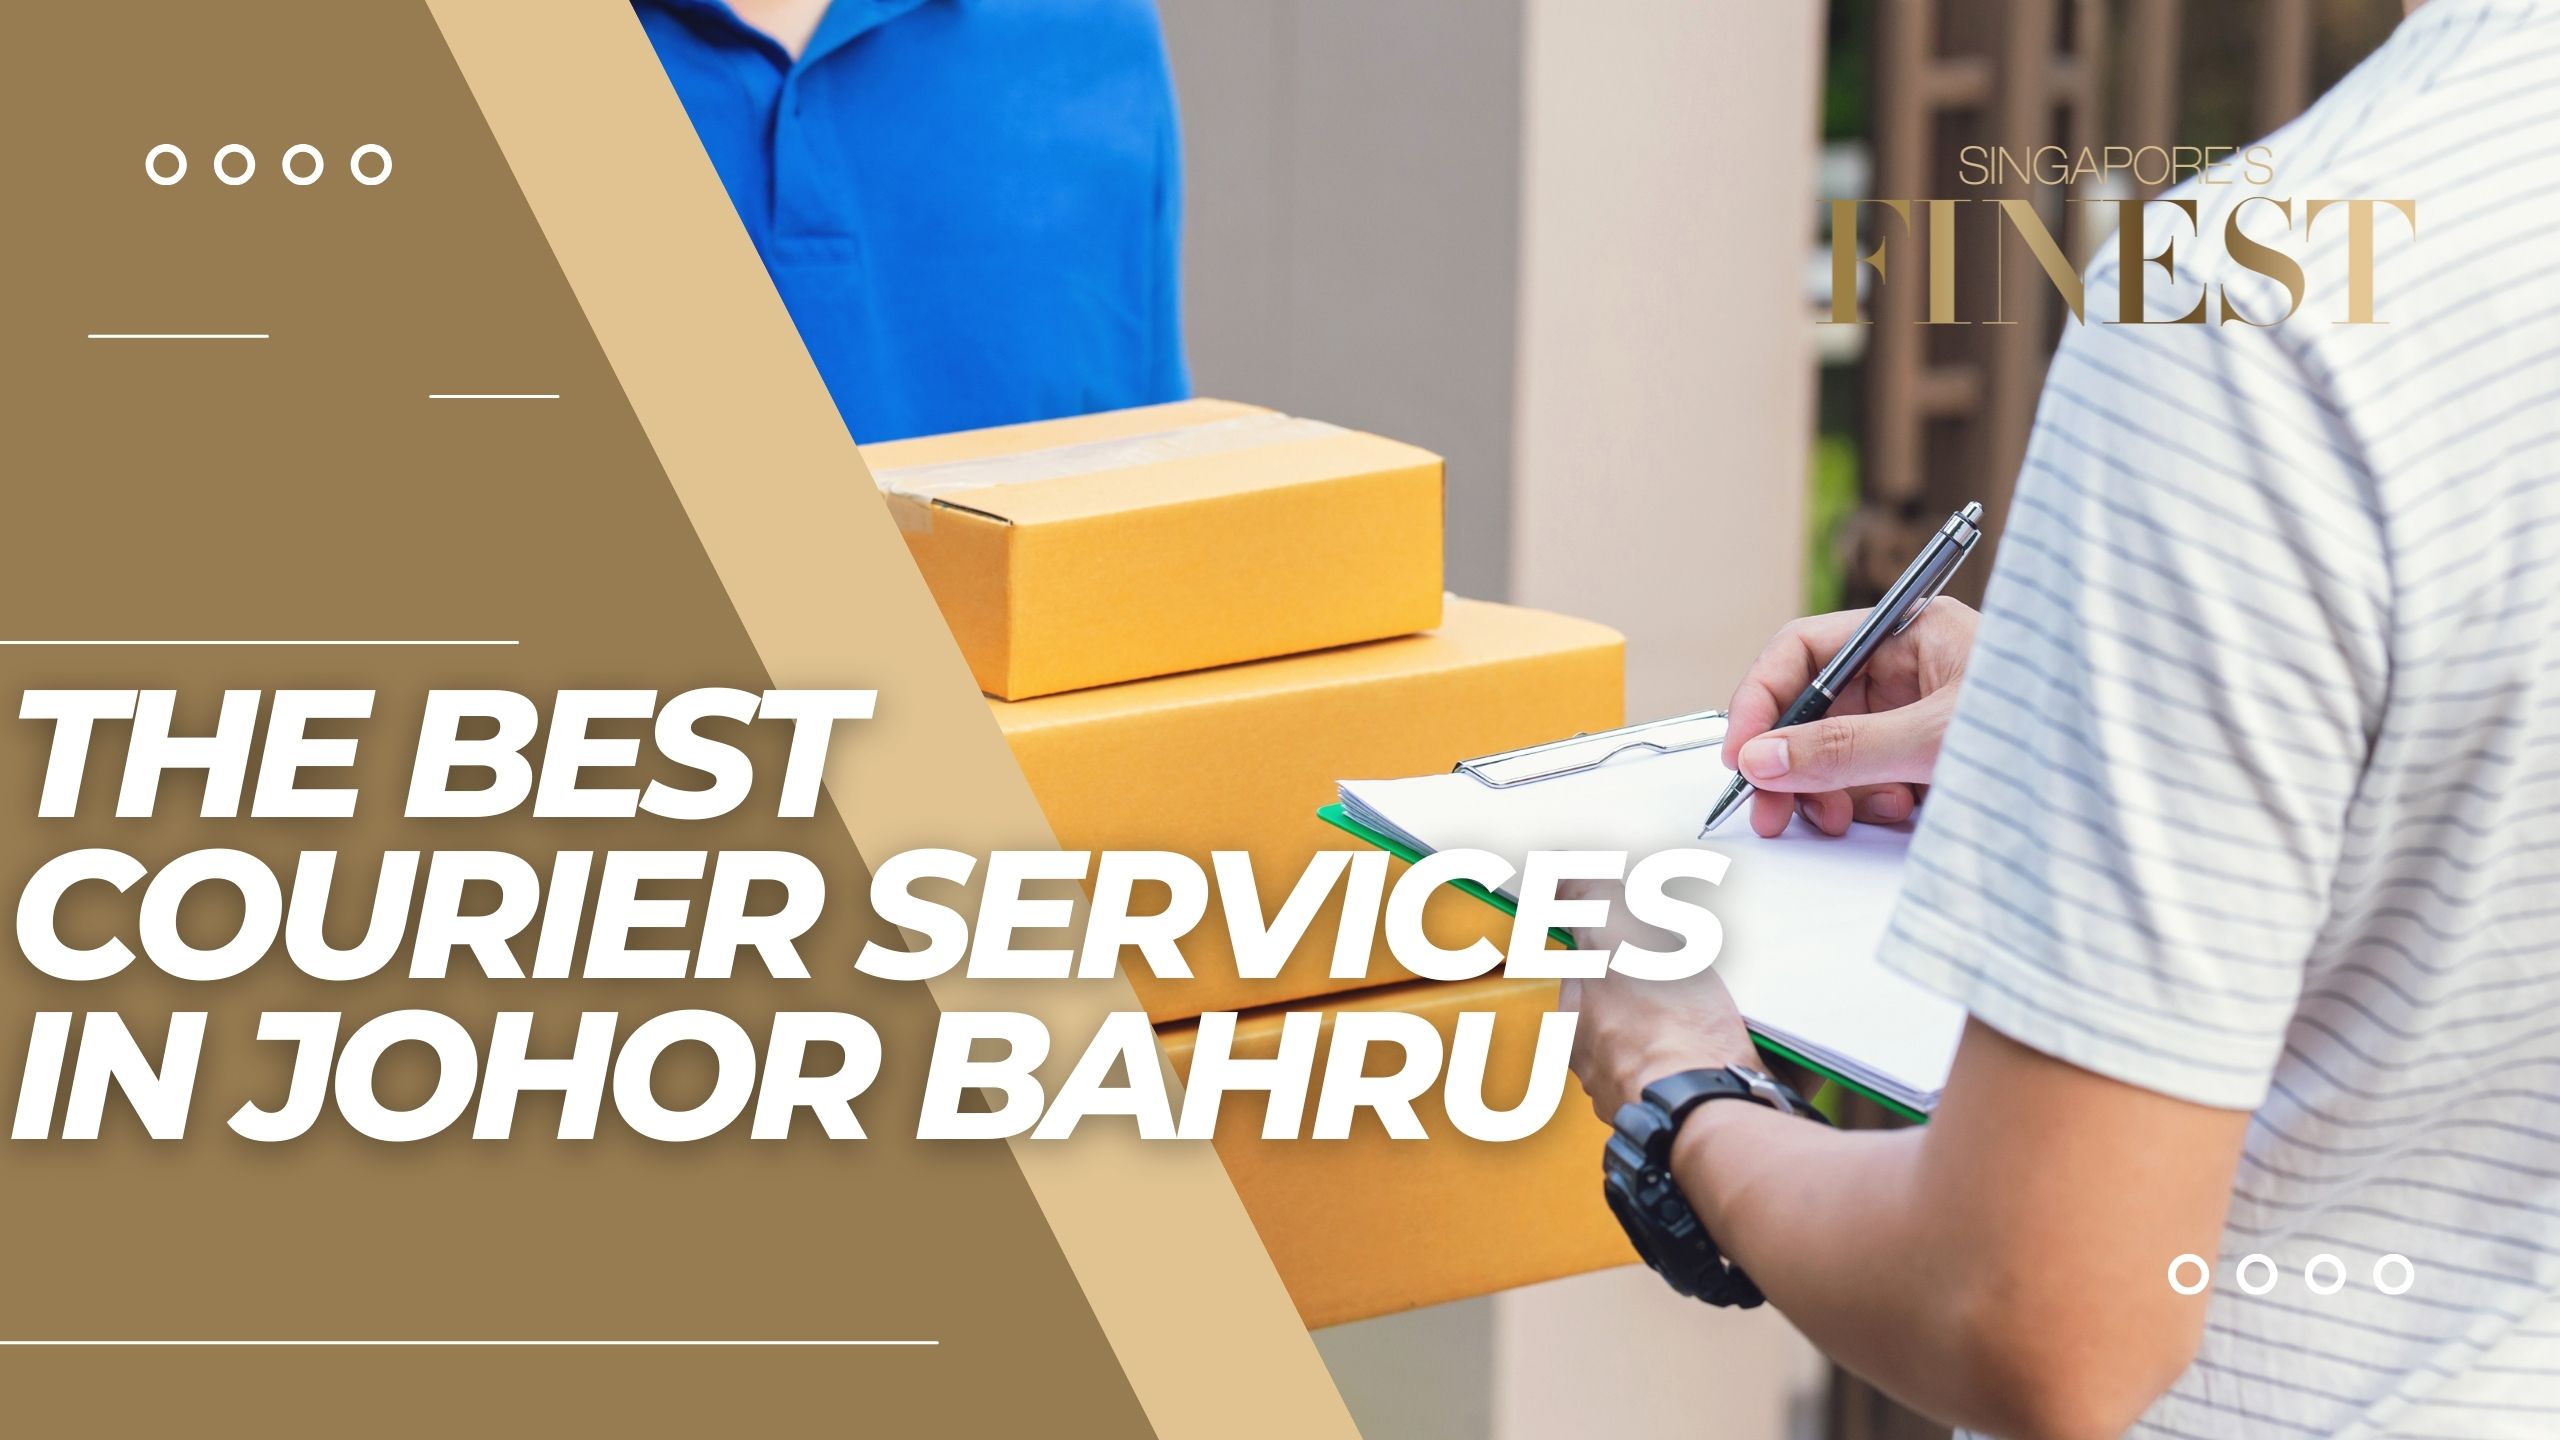 The Finest Courier Services in Johor Bahru